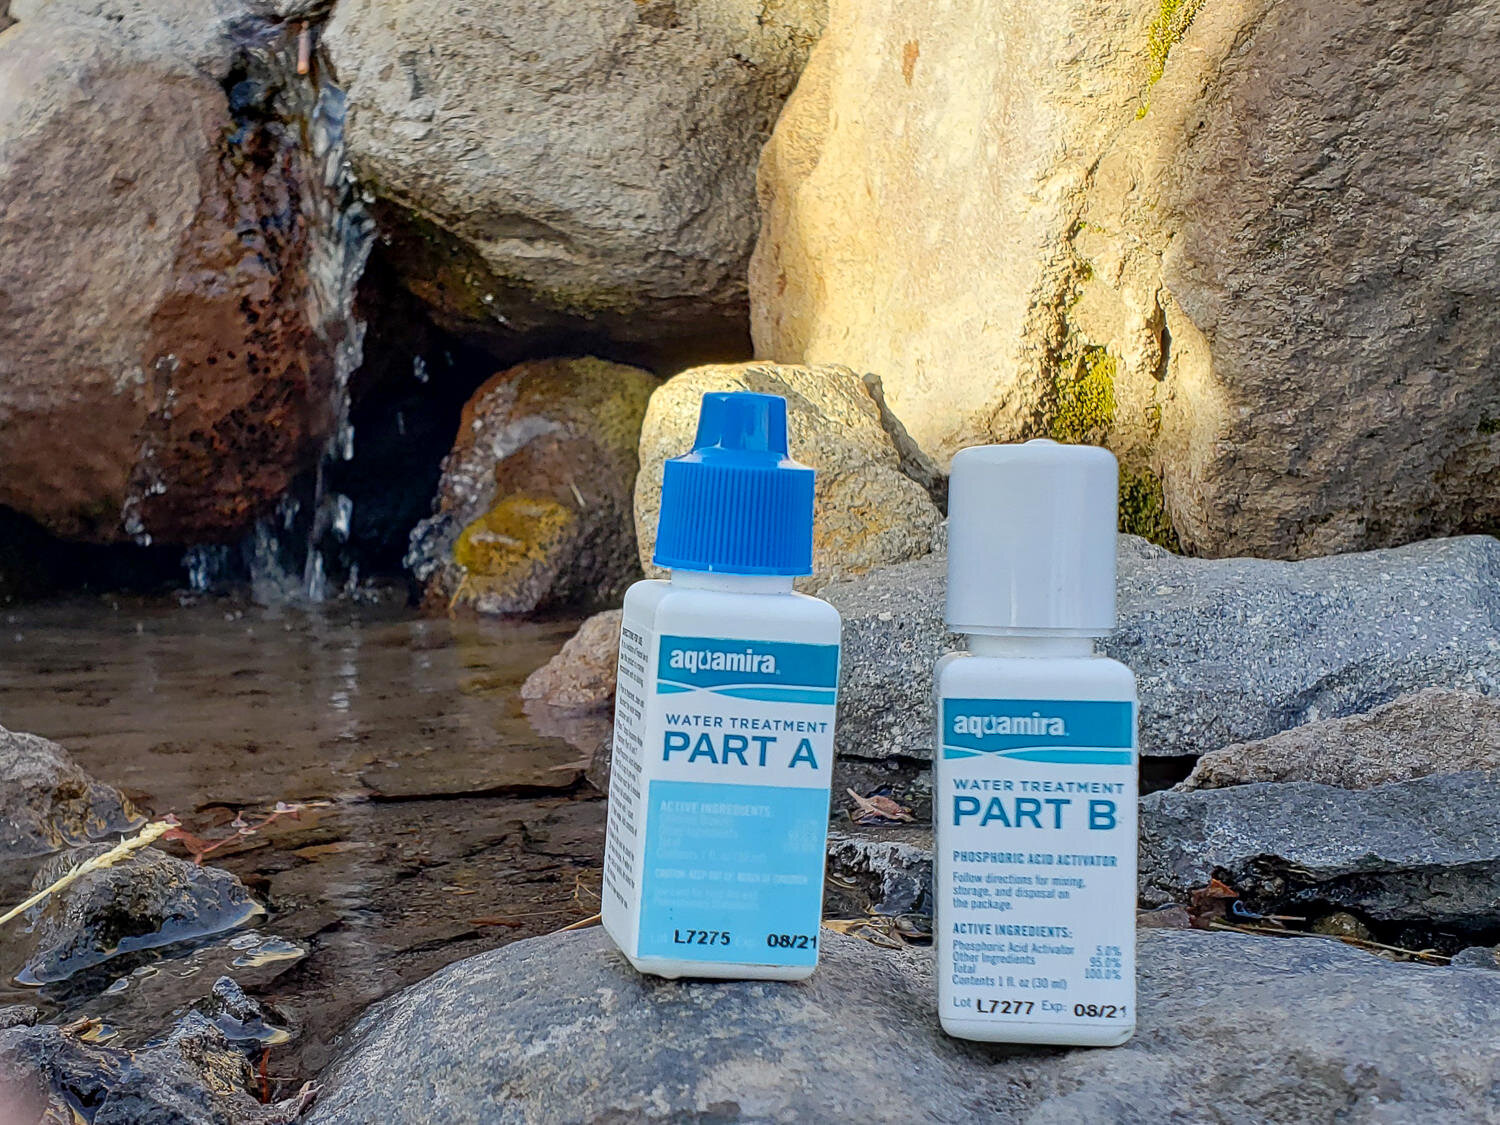 chlorine dioxide drops are a quick & lightweight water treatment for winter trips.